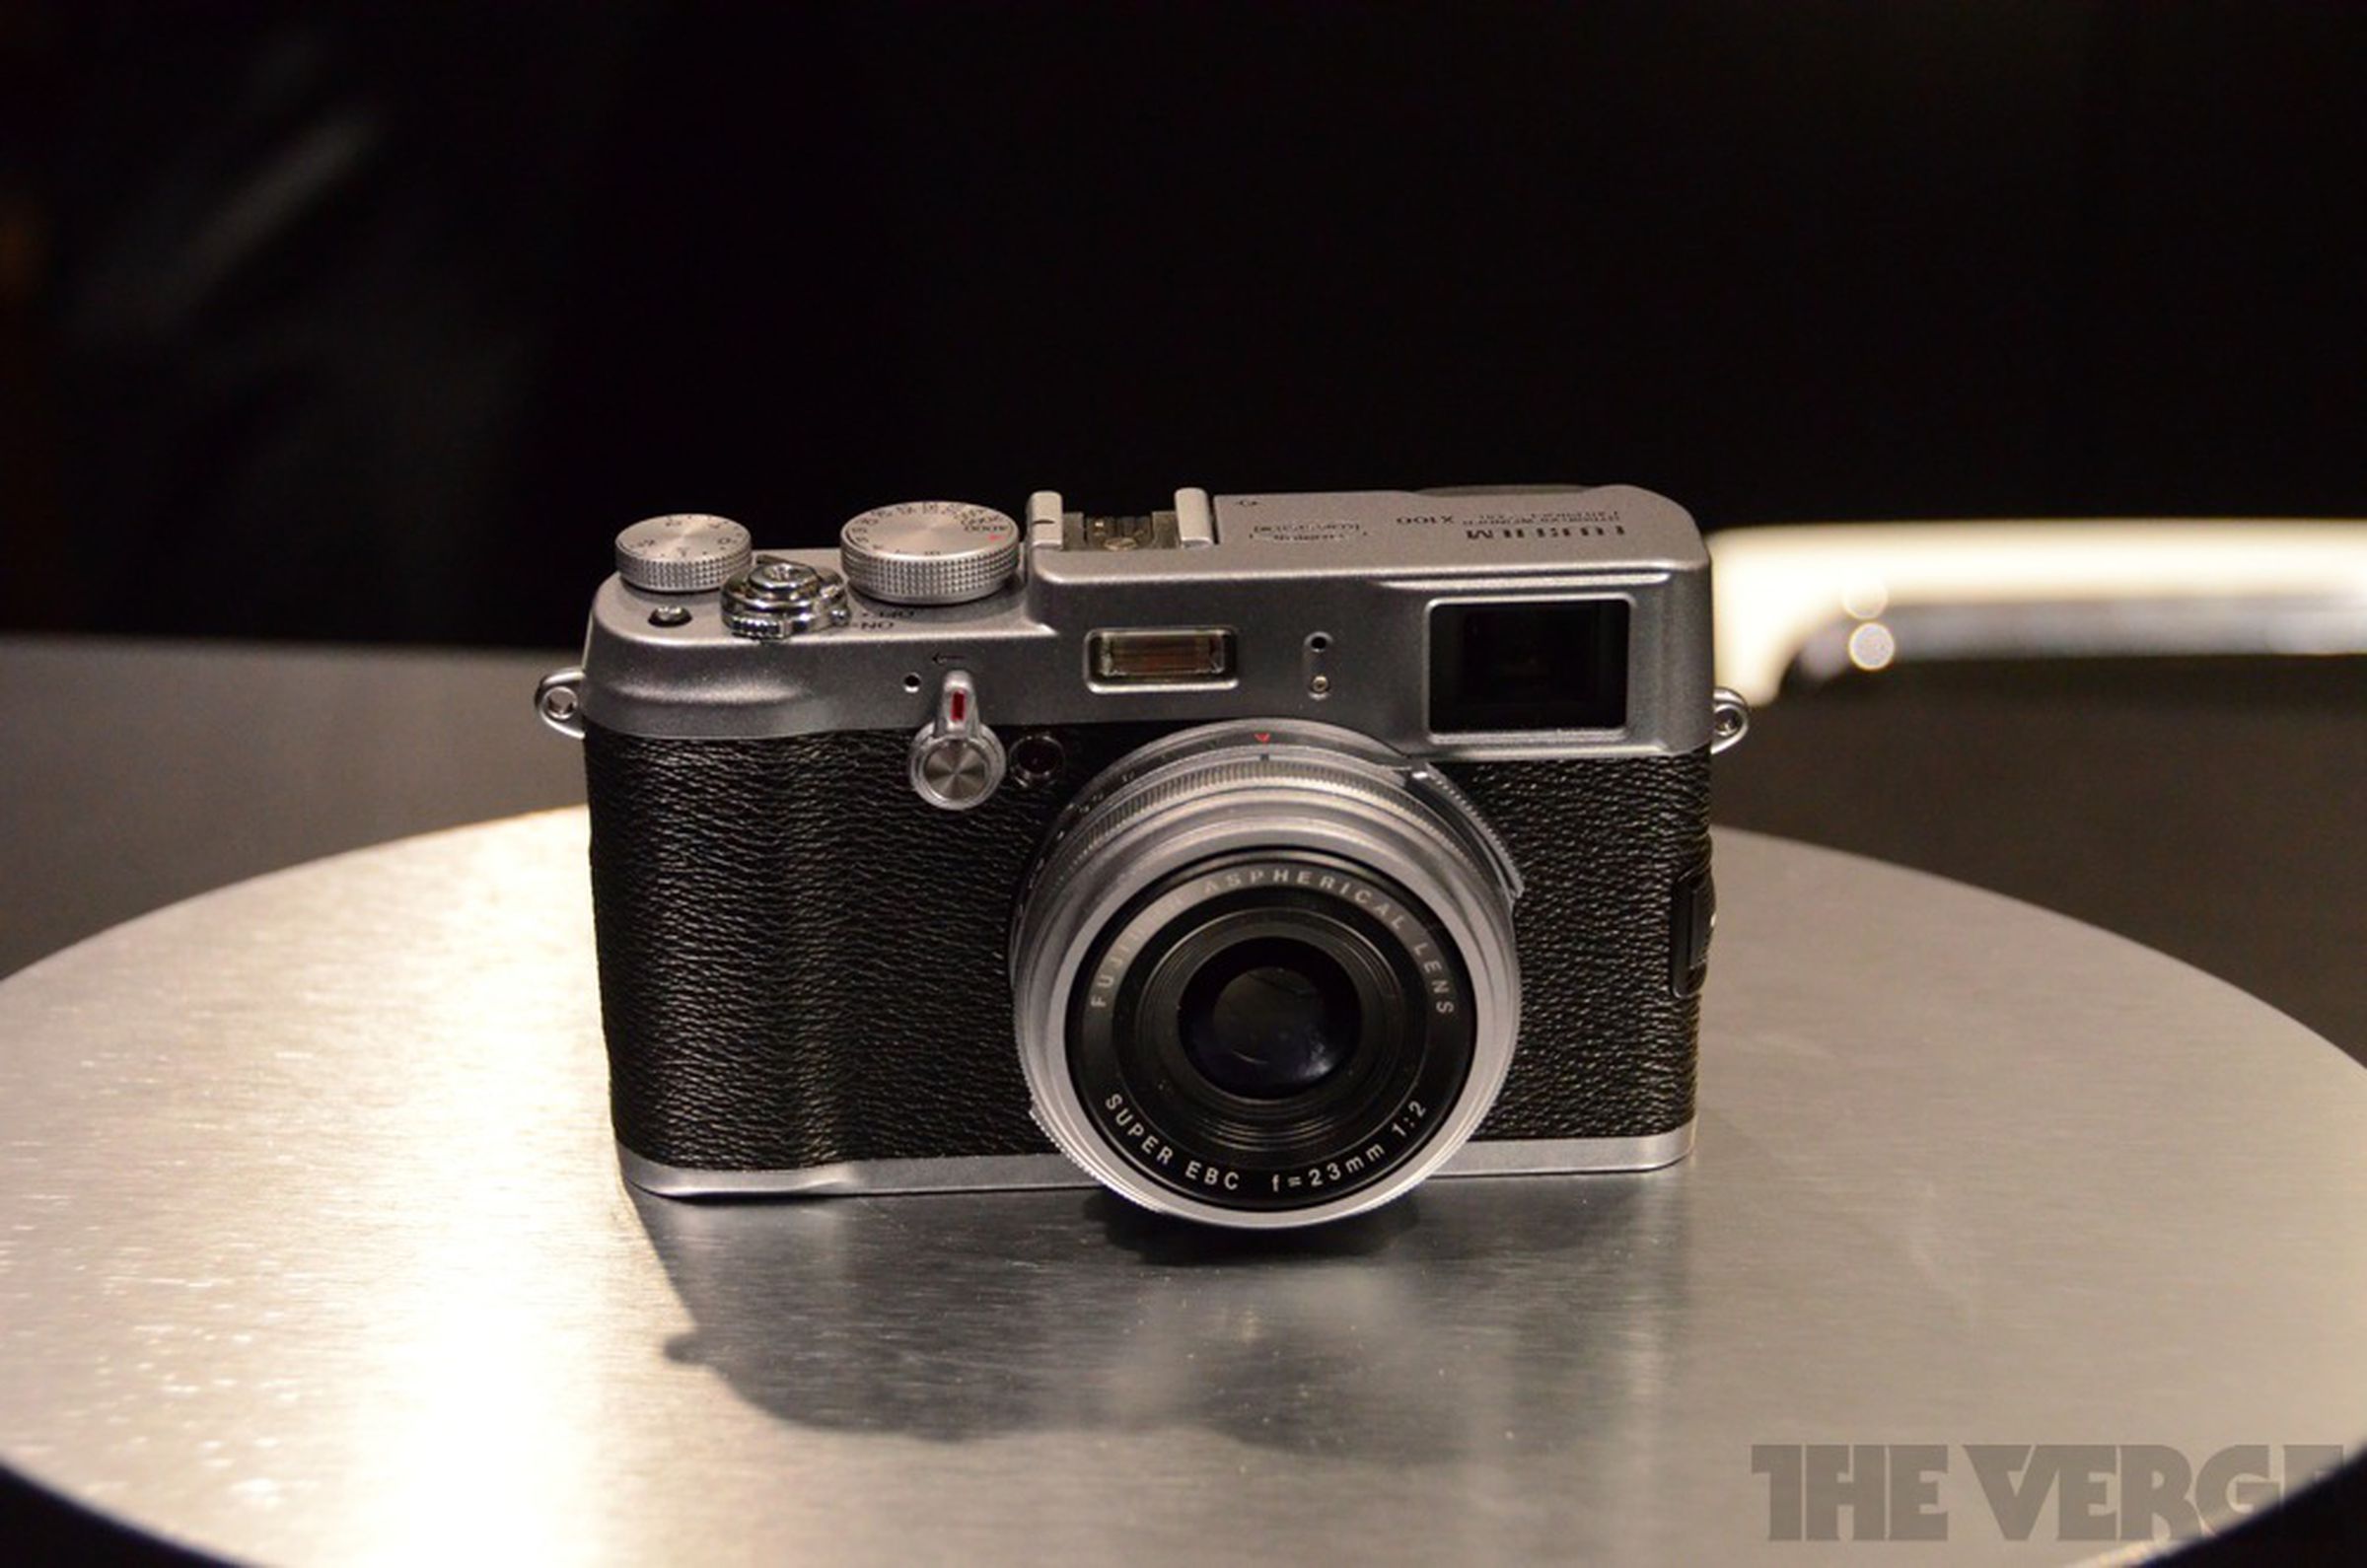 Fujifilm black X100 hands-on pictures